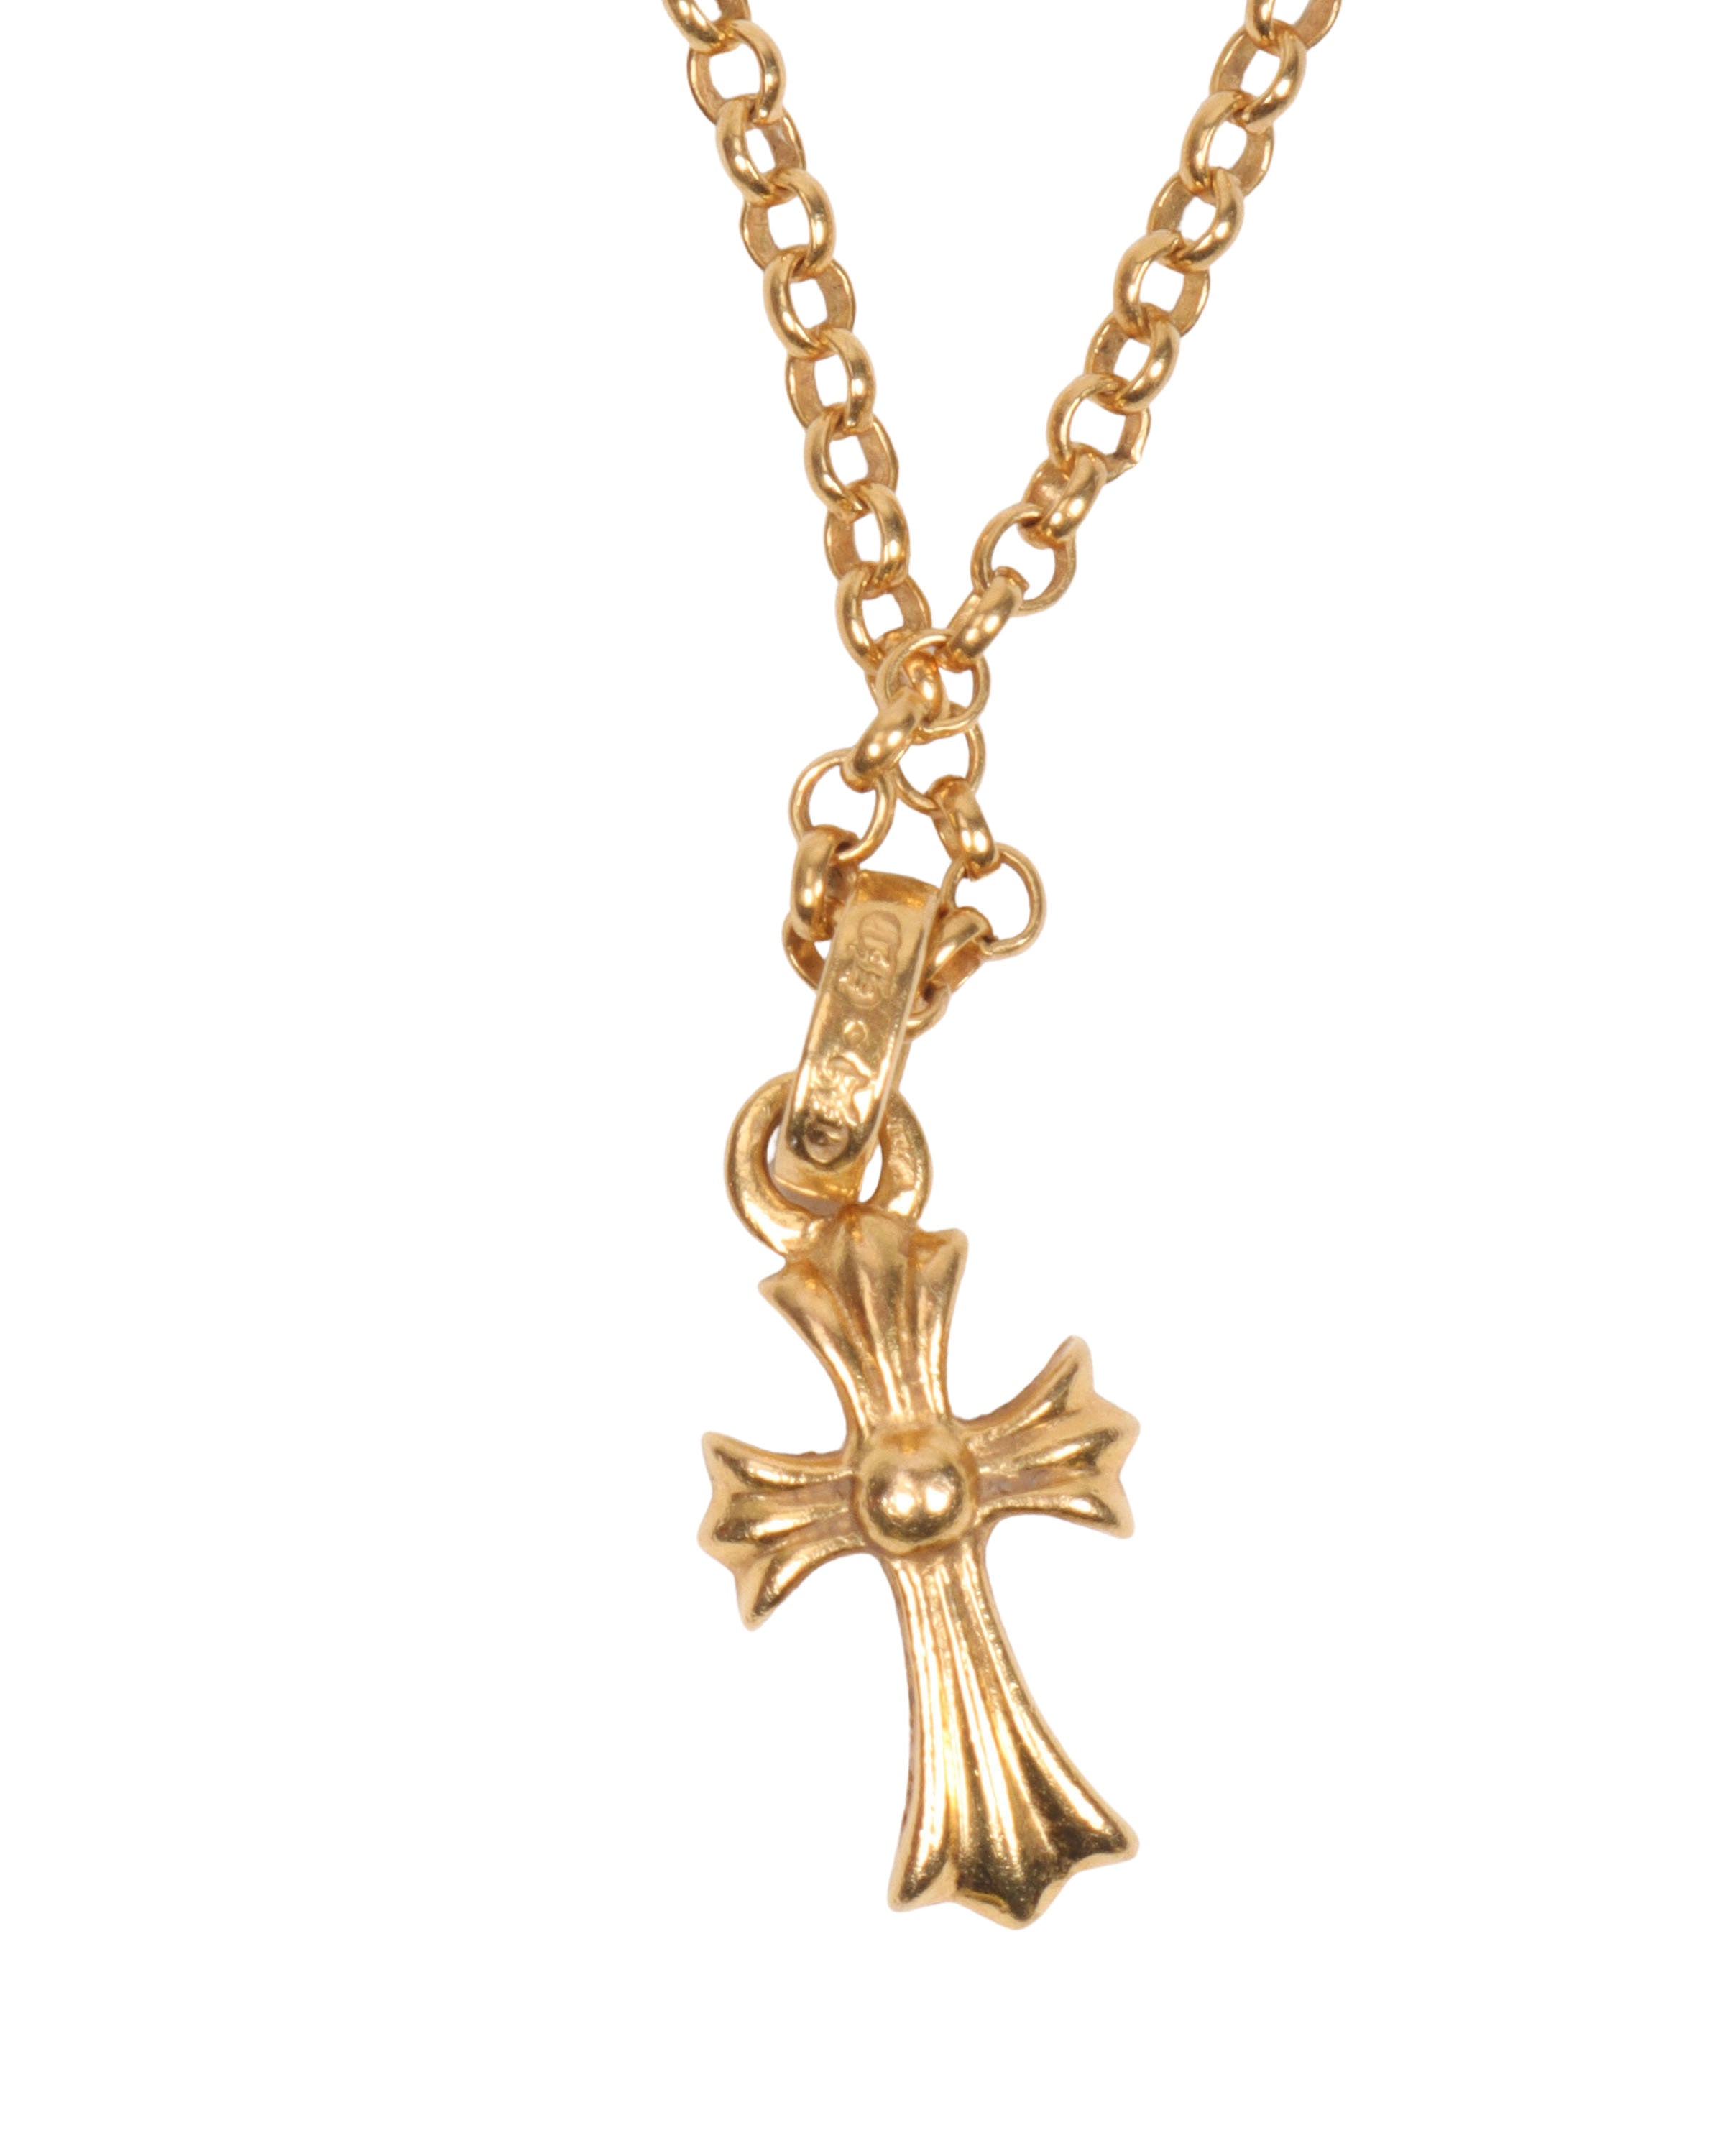 Dexter Cross Charm Necklace | Urban Outfitters Japan - Clothing, Music,  Home & Accessories